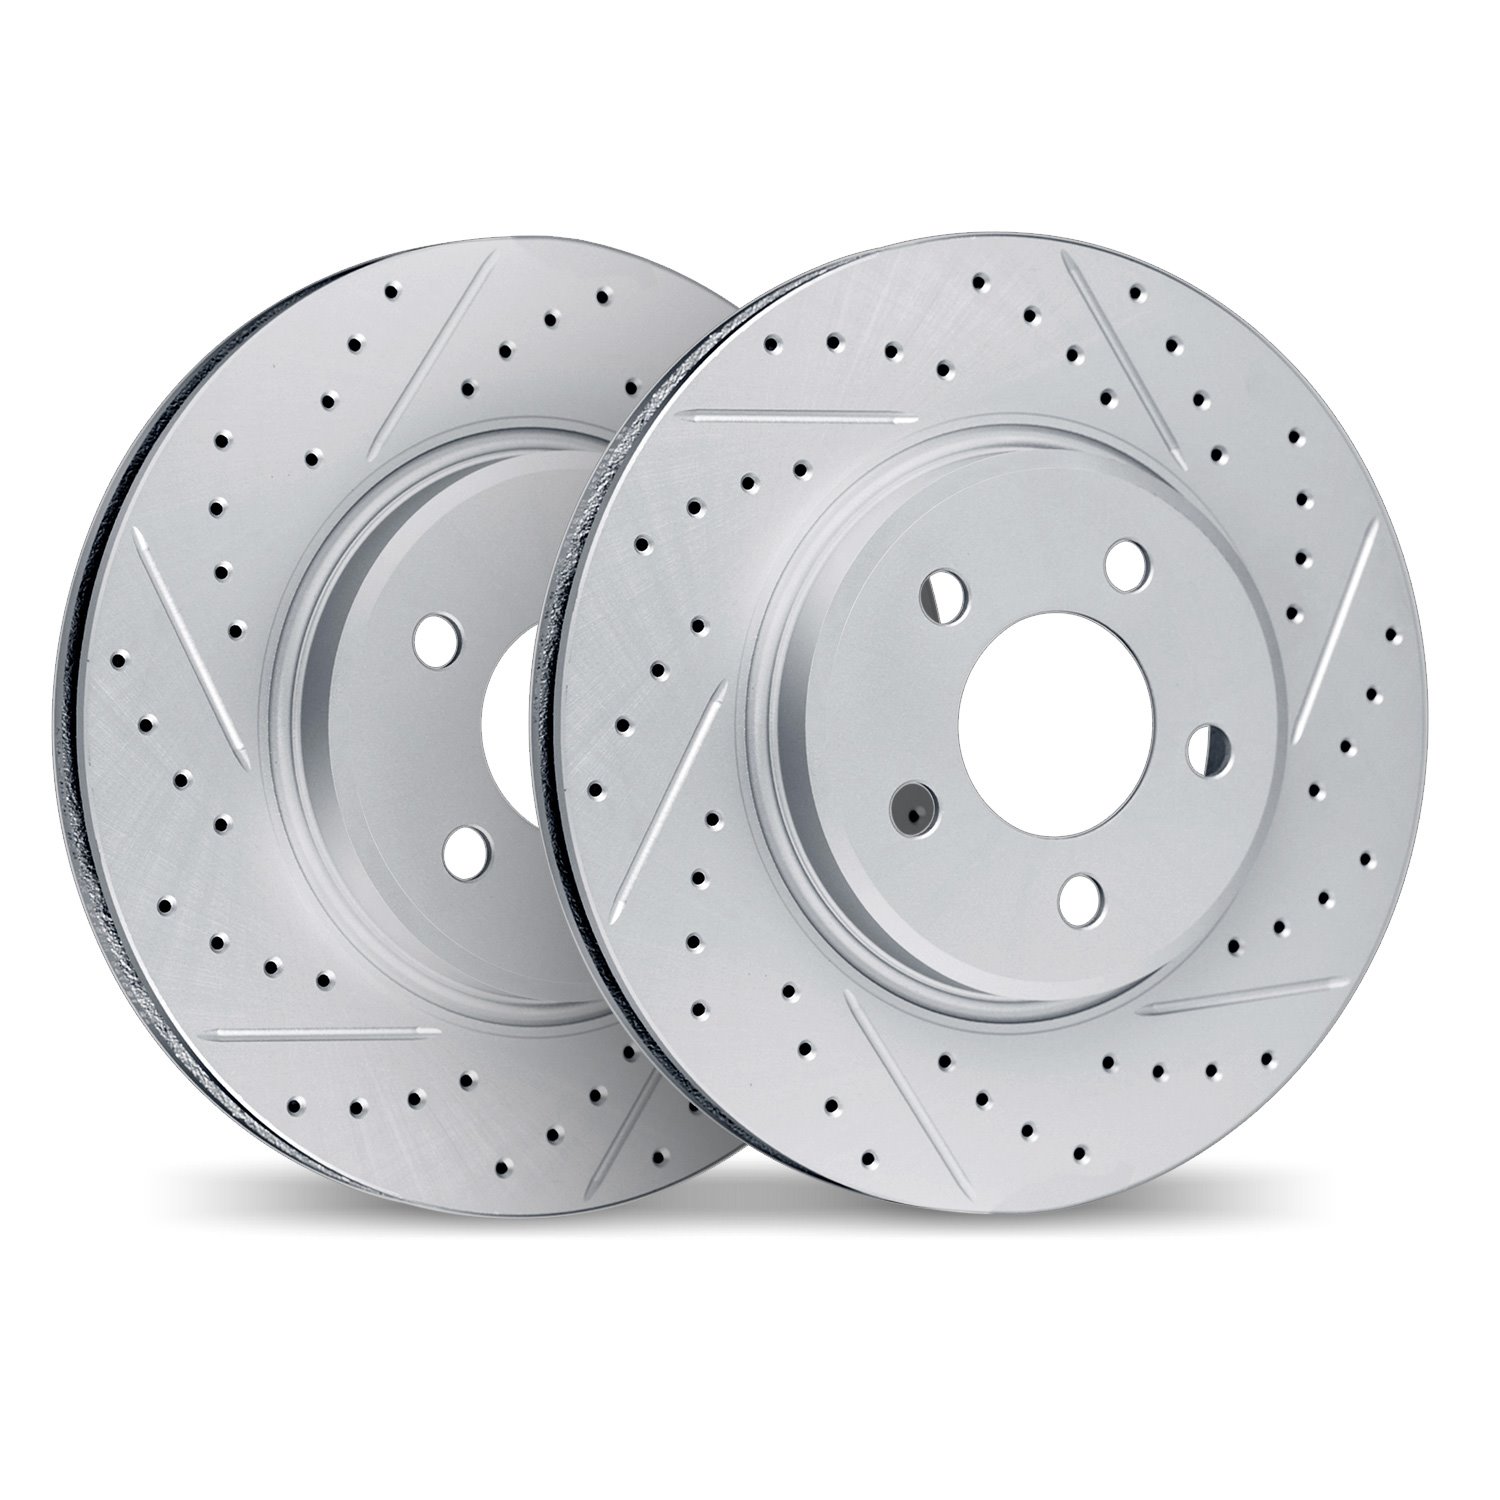 2002-67184 Geoperformance Drilled/Slotted Brake Rotors, Fits Select Infiniti/Nissan, Position: Front